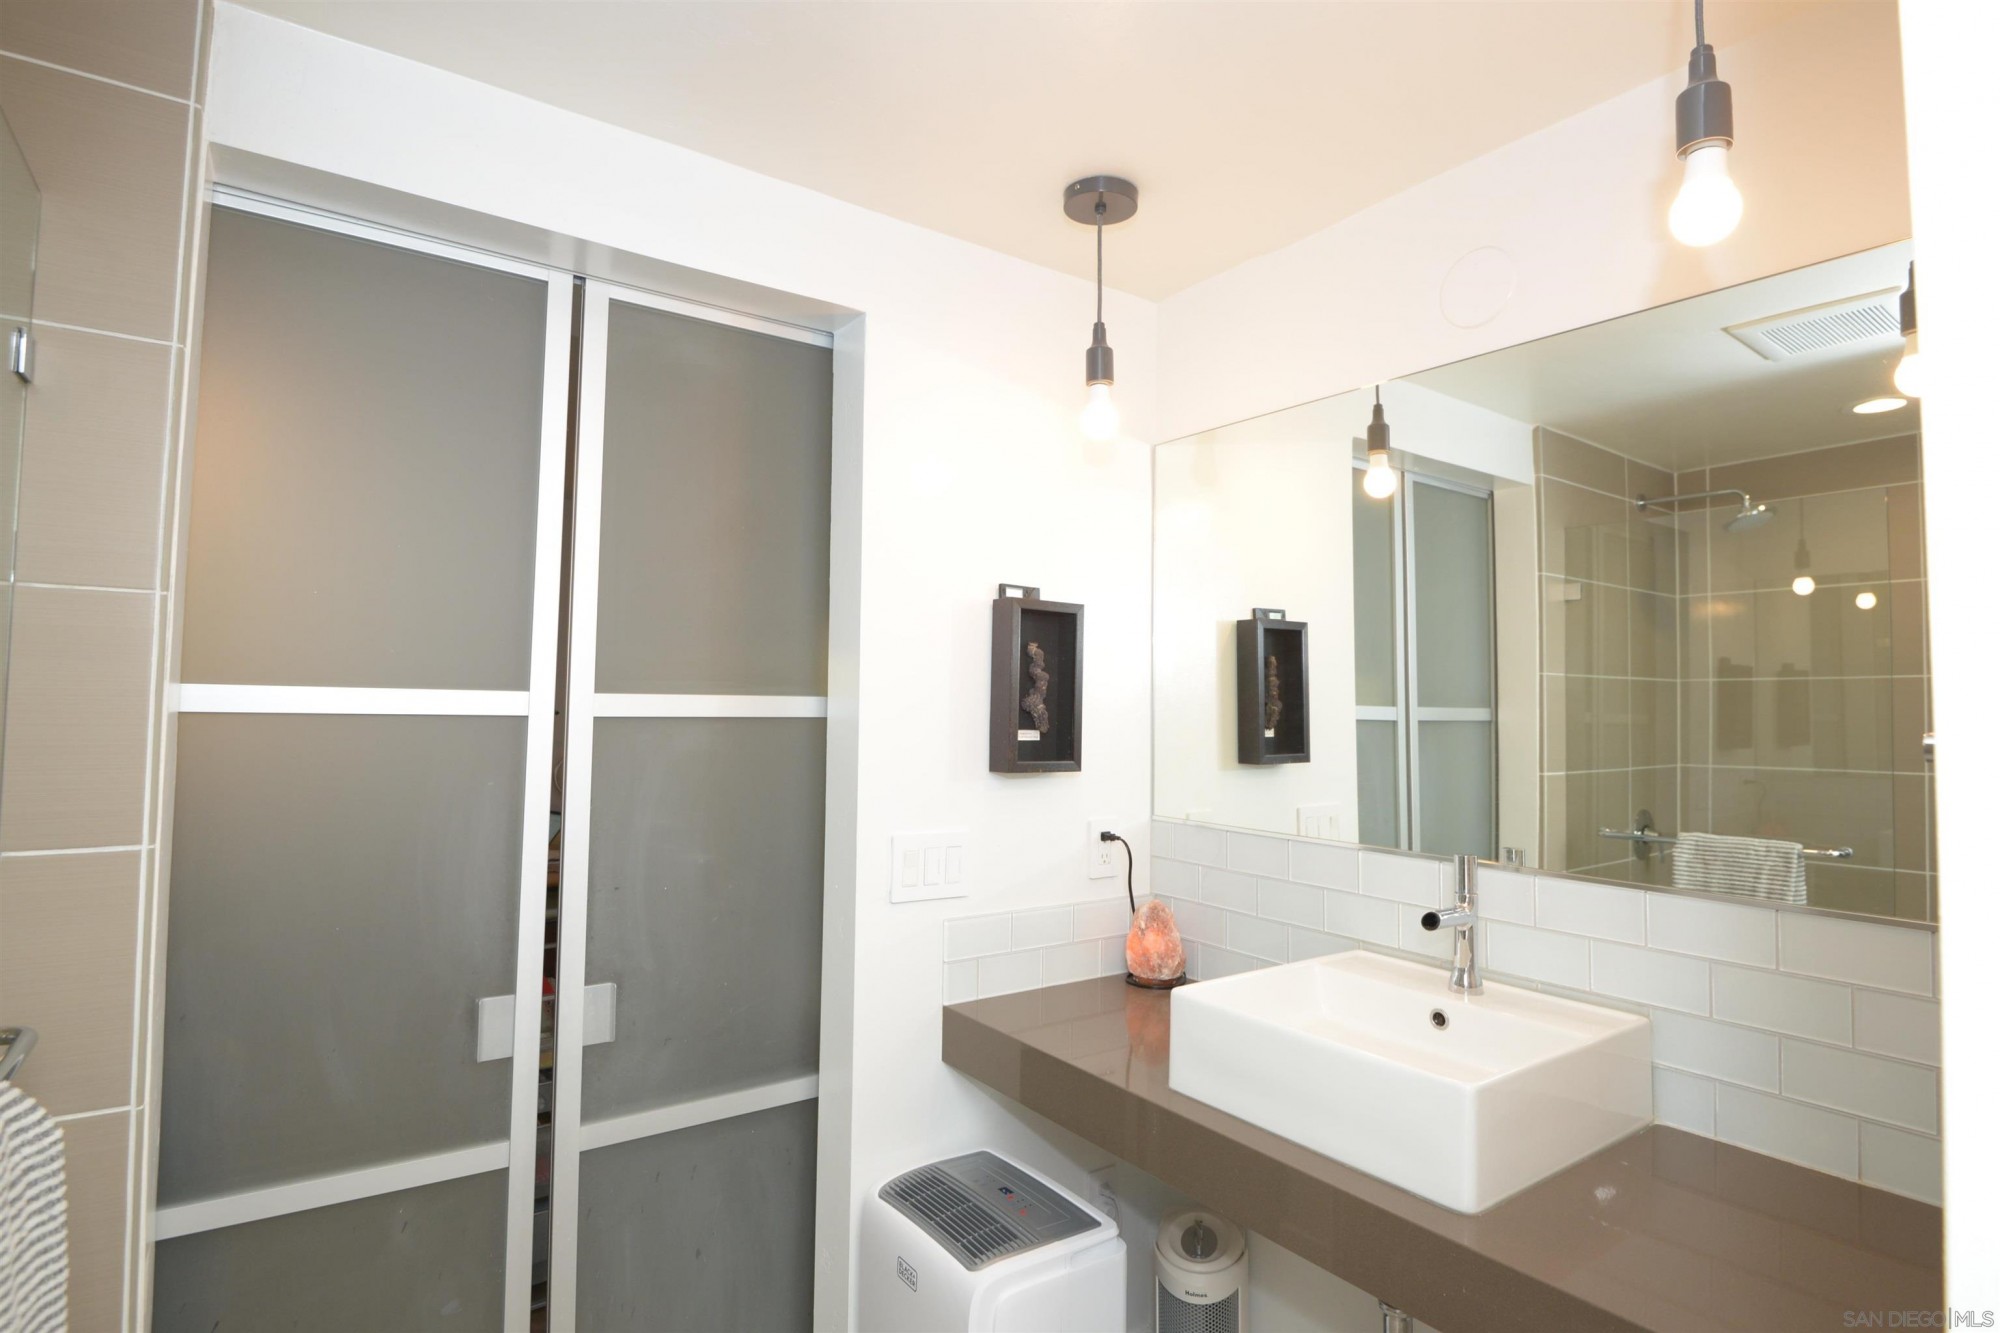 Interior bathroom shot with aluminum frosted doors closed